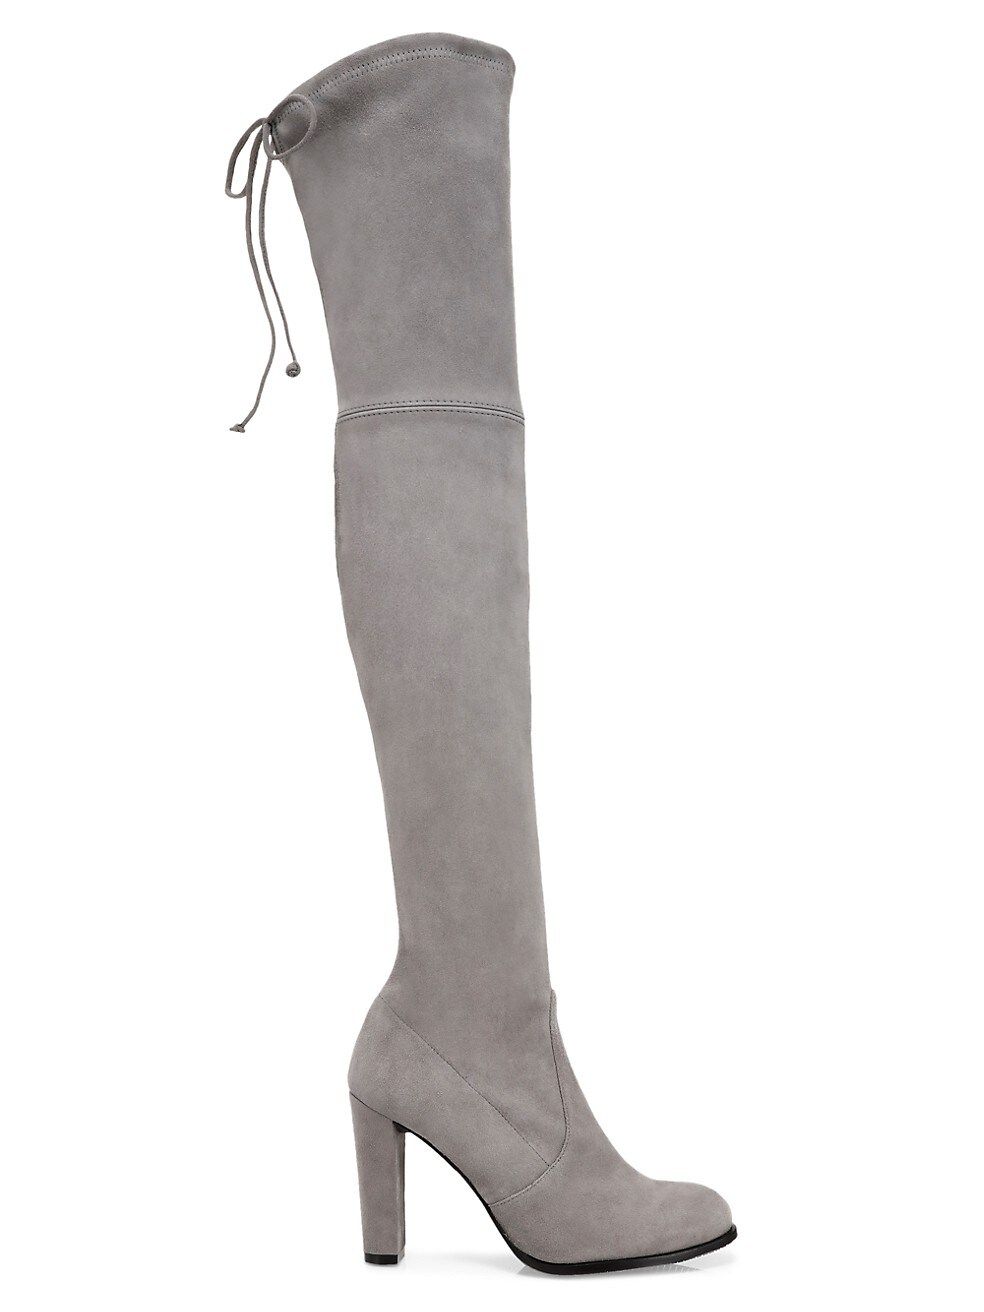 Highland Over-The-Knee Suede Boots | Saks Fifth Avenue